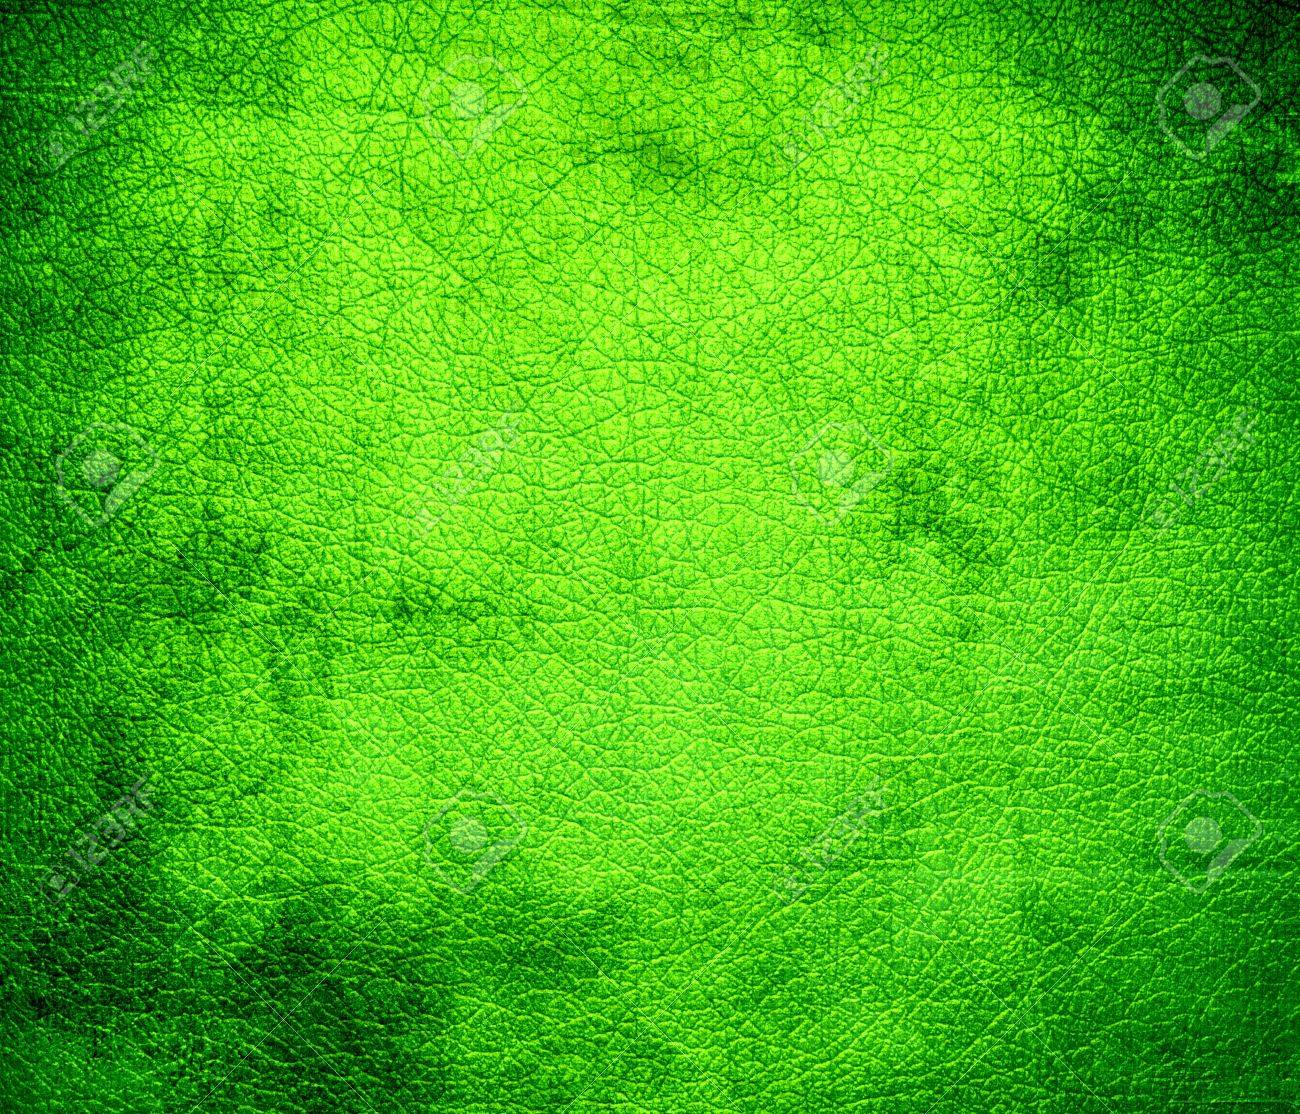 Grunge Background Of Chartreuse Web Leather Texture Stock Photo